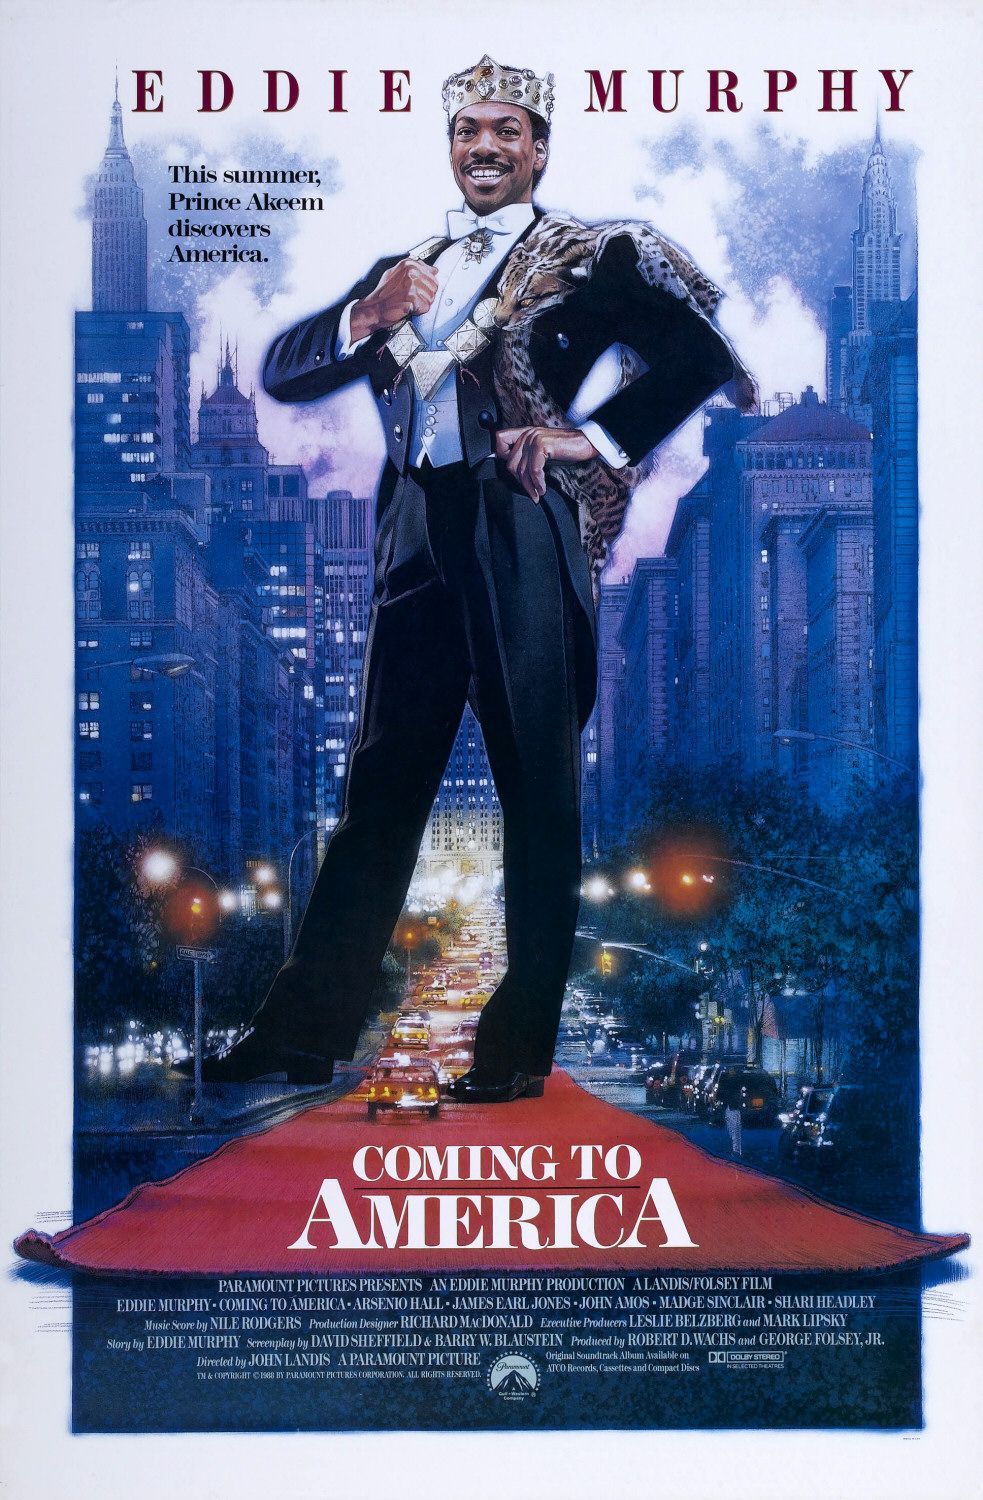 coming to america - E D D I E3 Murphy This summer, Prince Akeem discovers America. Brew Car Coming To America Paramount Pictures Presents An Eddie Murphy Production AlandisFolsey Film Eddie Murphy Coming To AmericaArsenio Hall James Earl Jones John Amos M